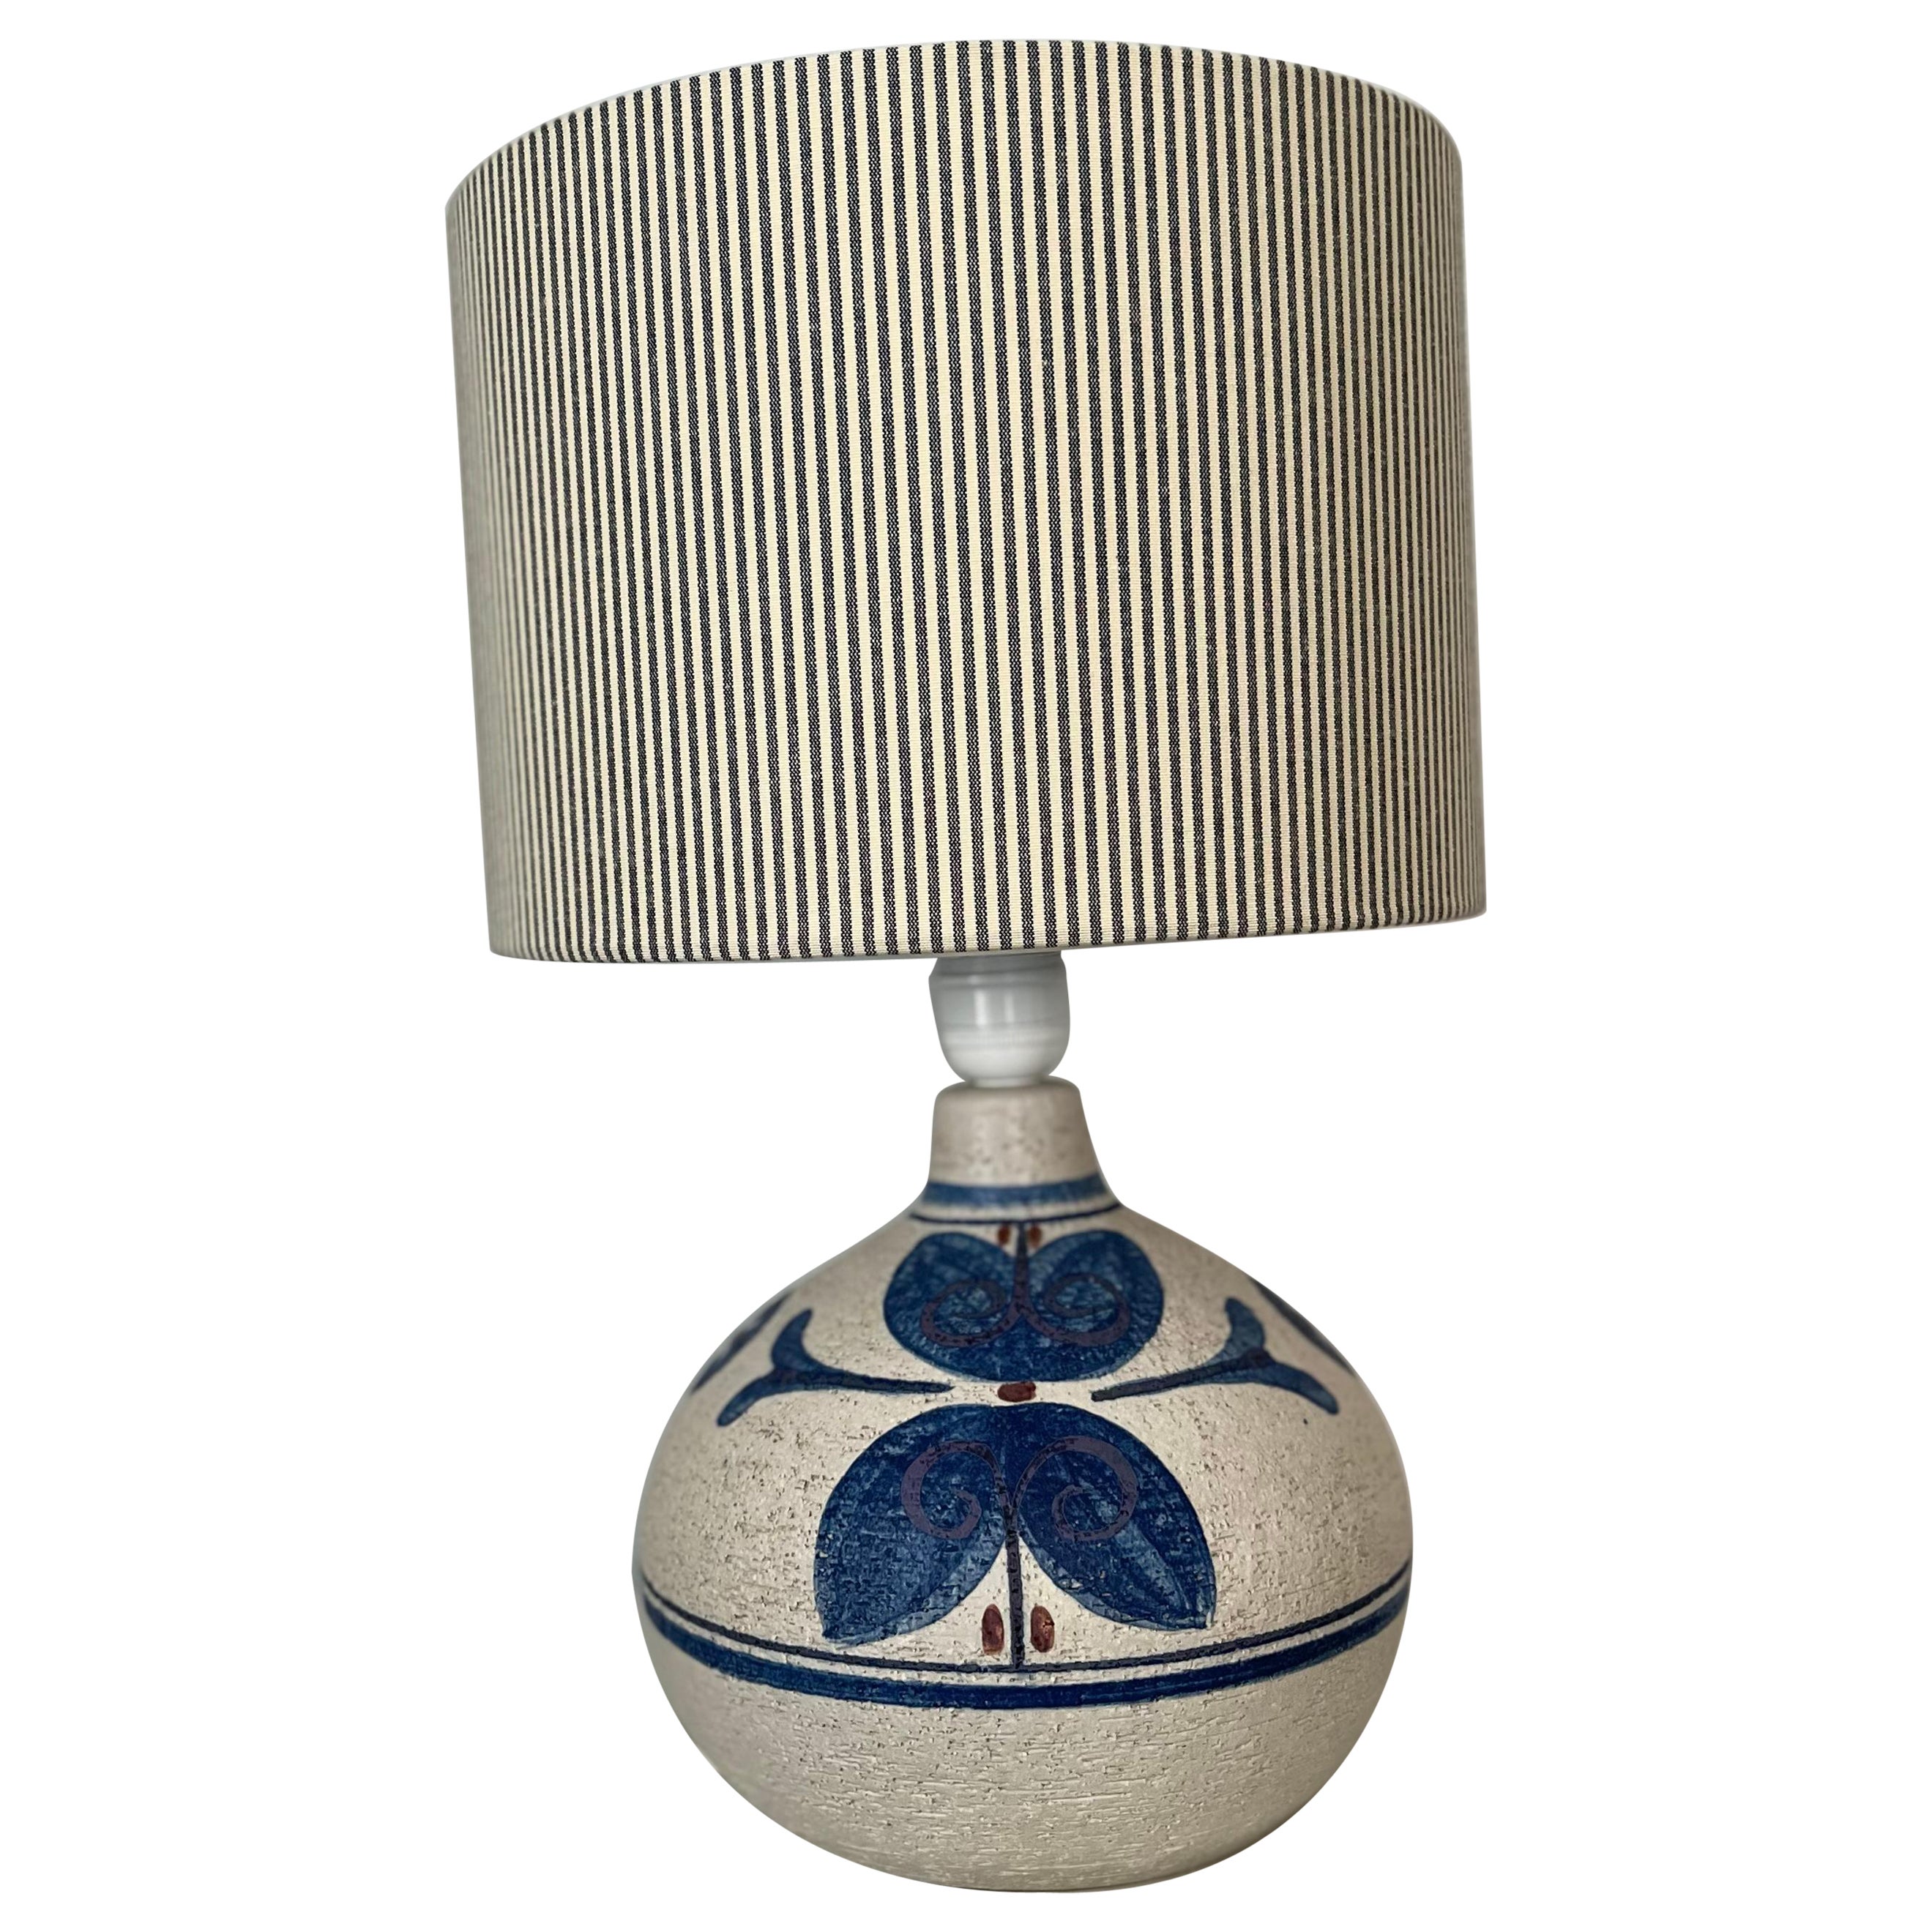 1960s Danish ceramic table lamp by Noomi Backhausen for Søholm For Sale